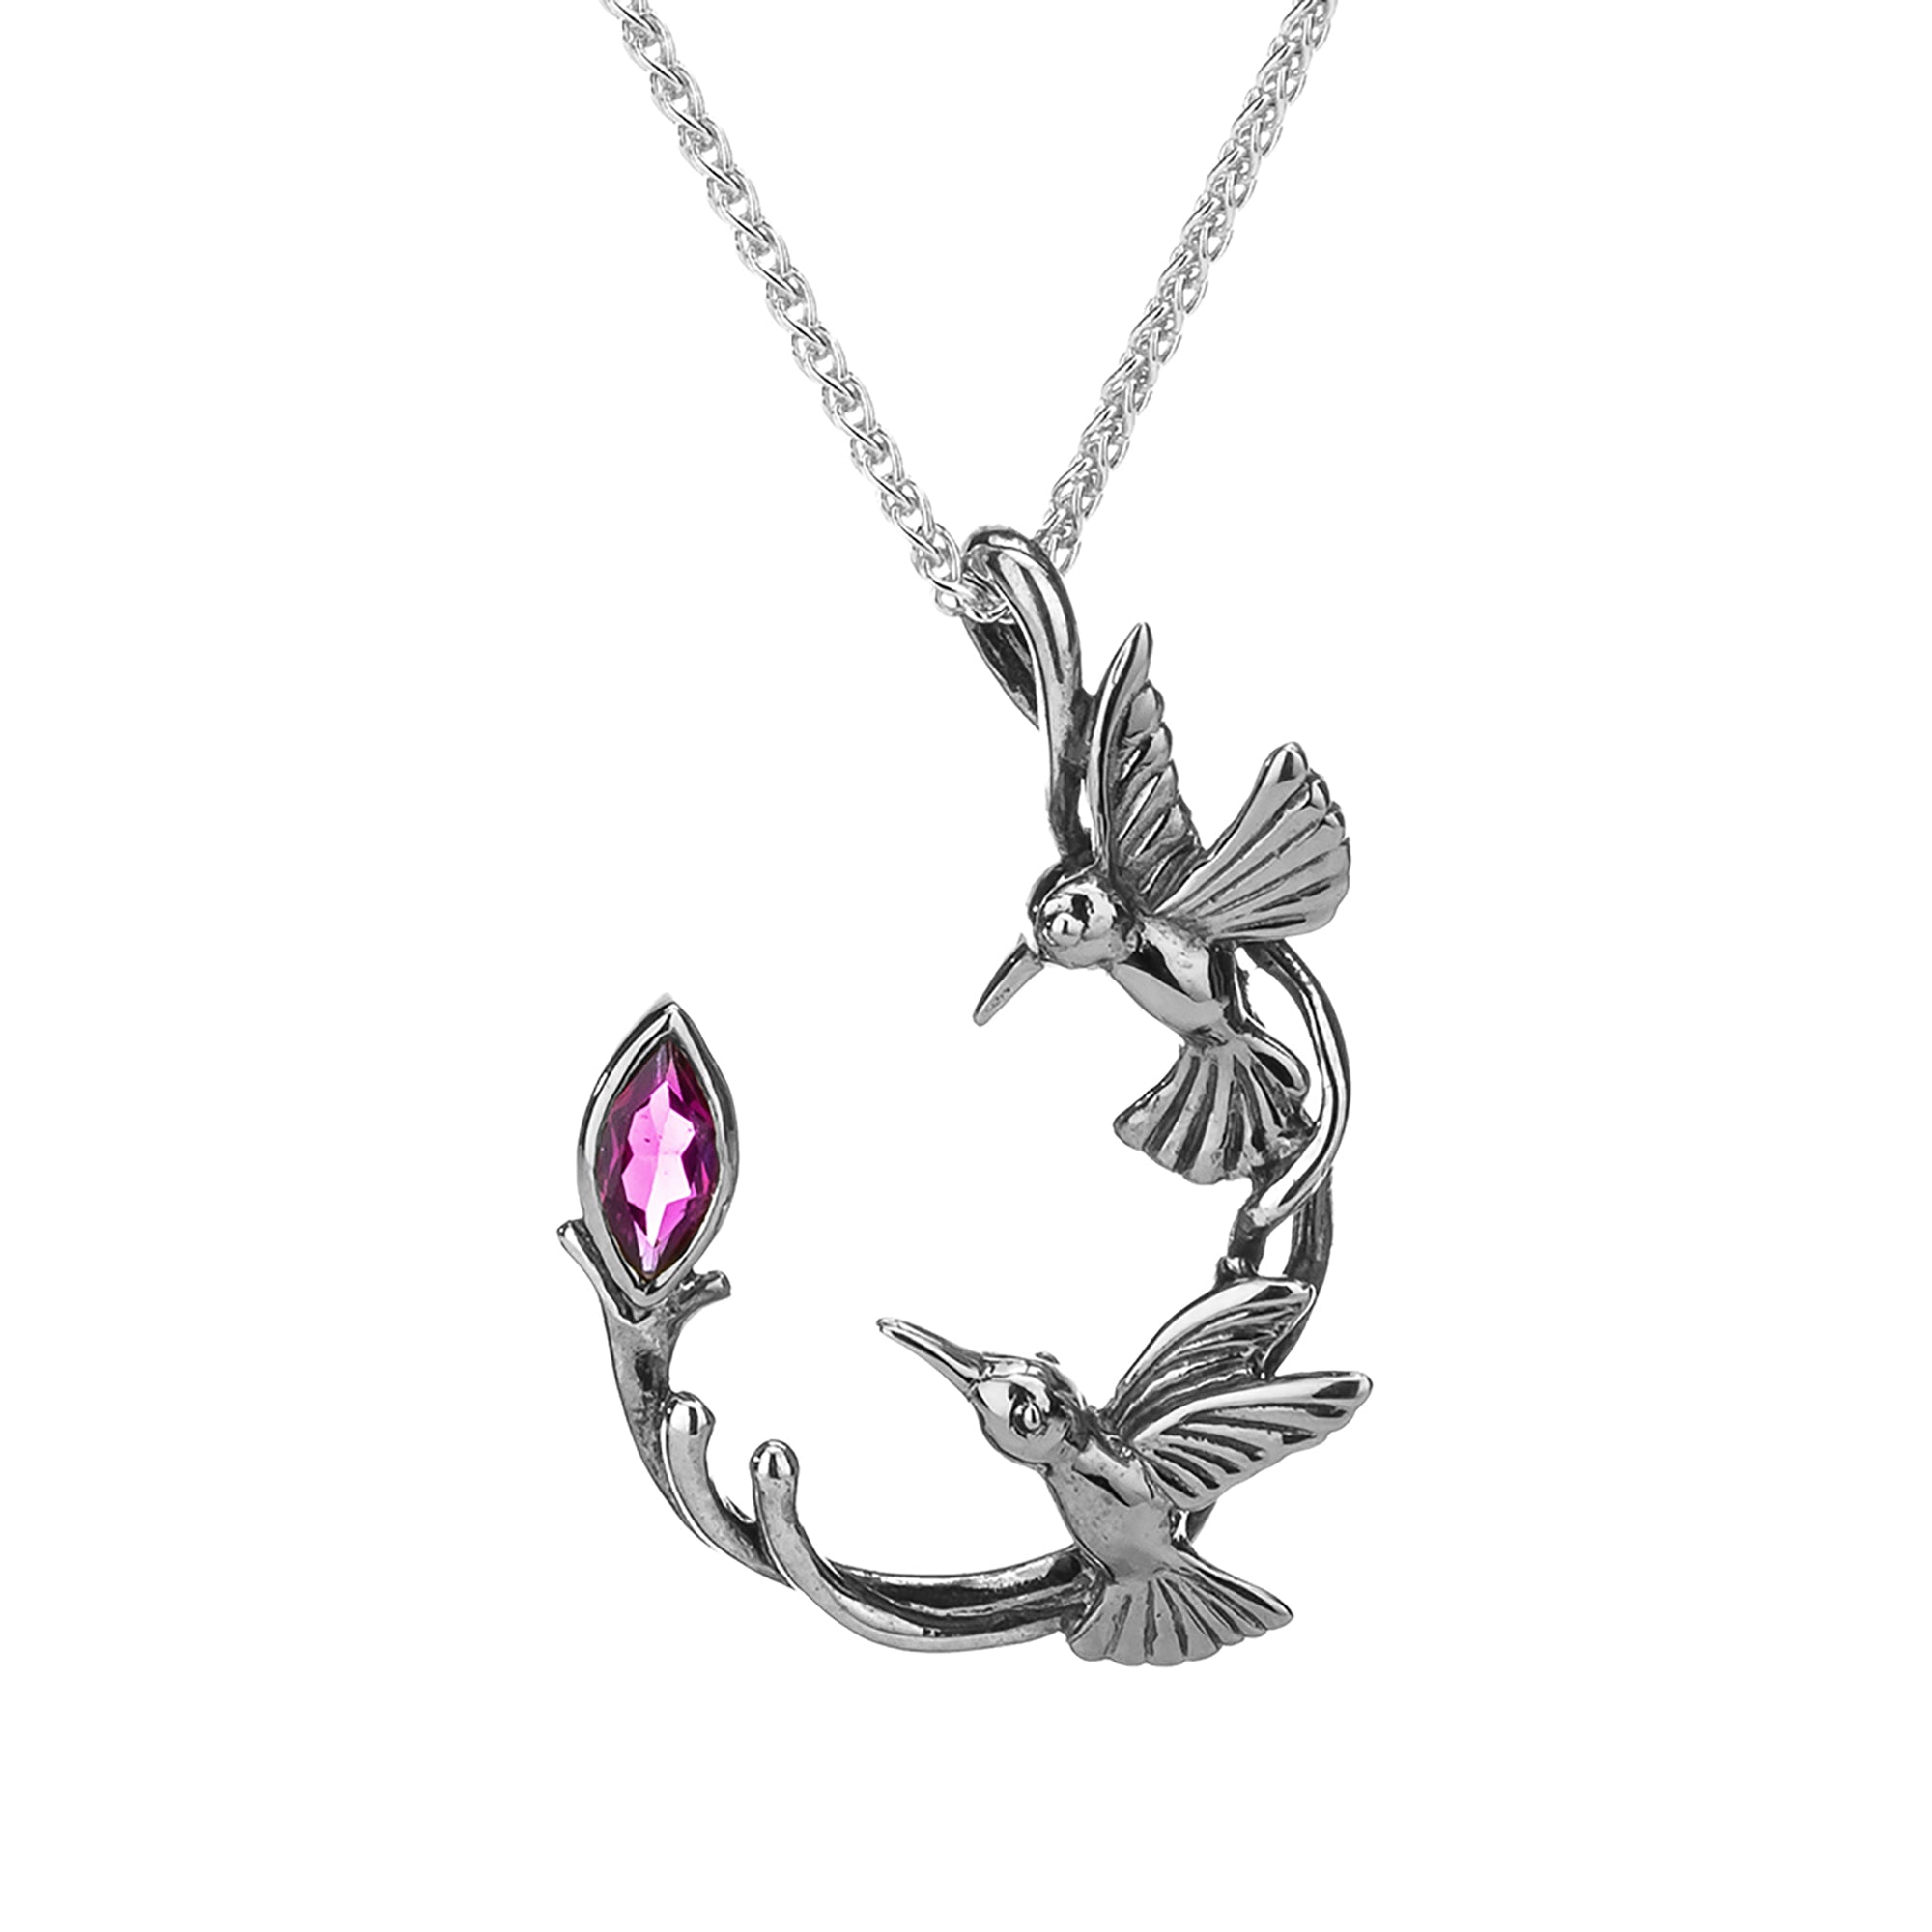 Hummingbird Necklace with Gemstones, Sterling Silver & 10k Gold Options